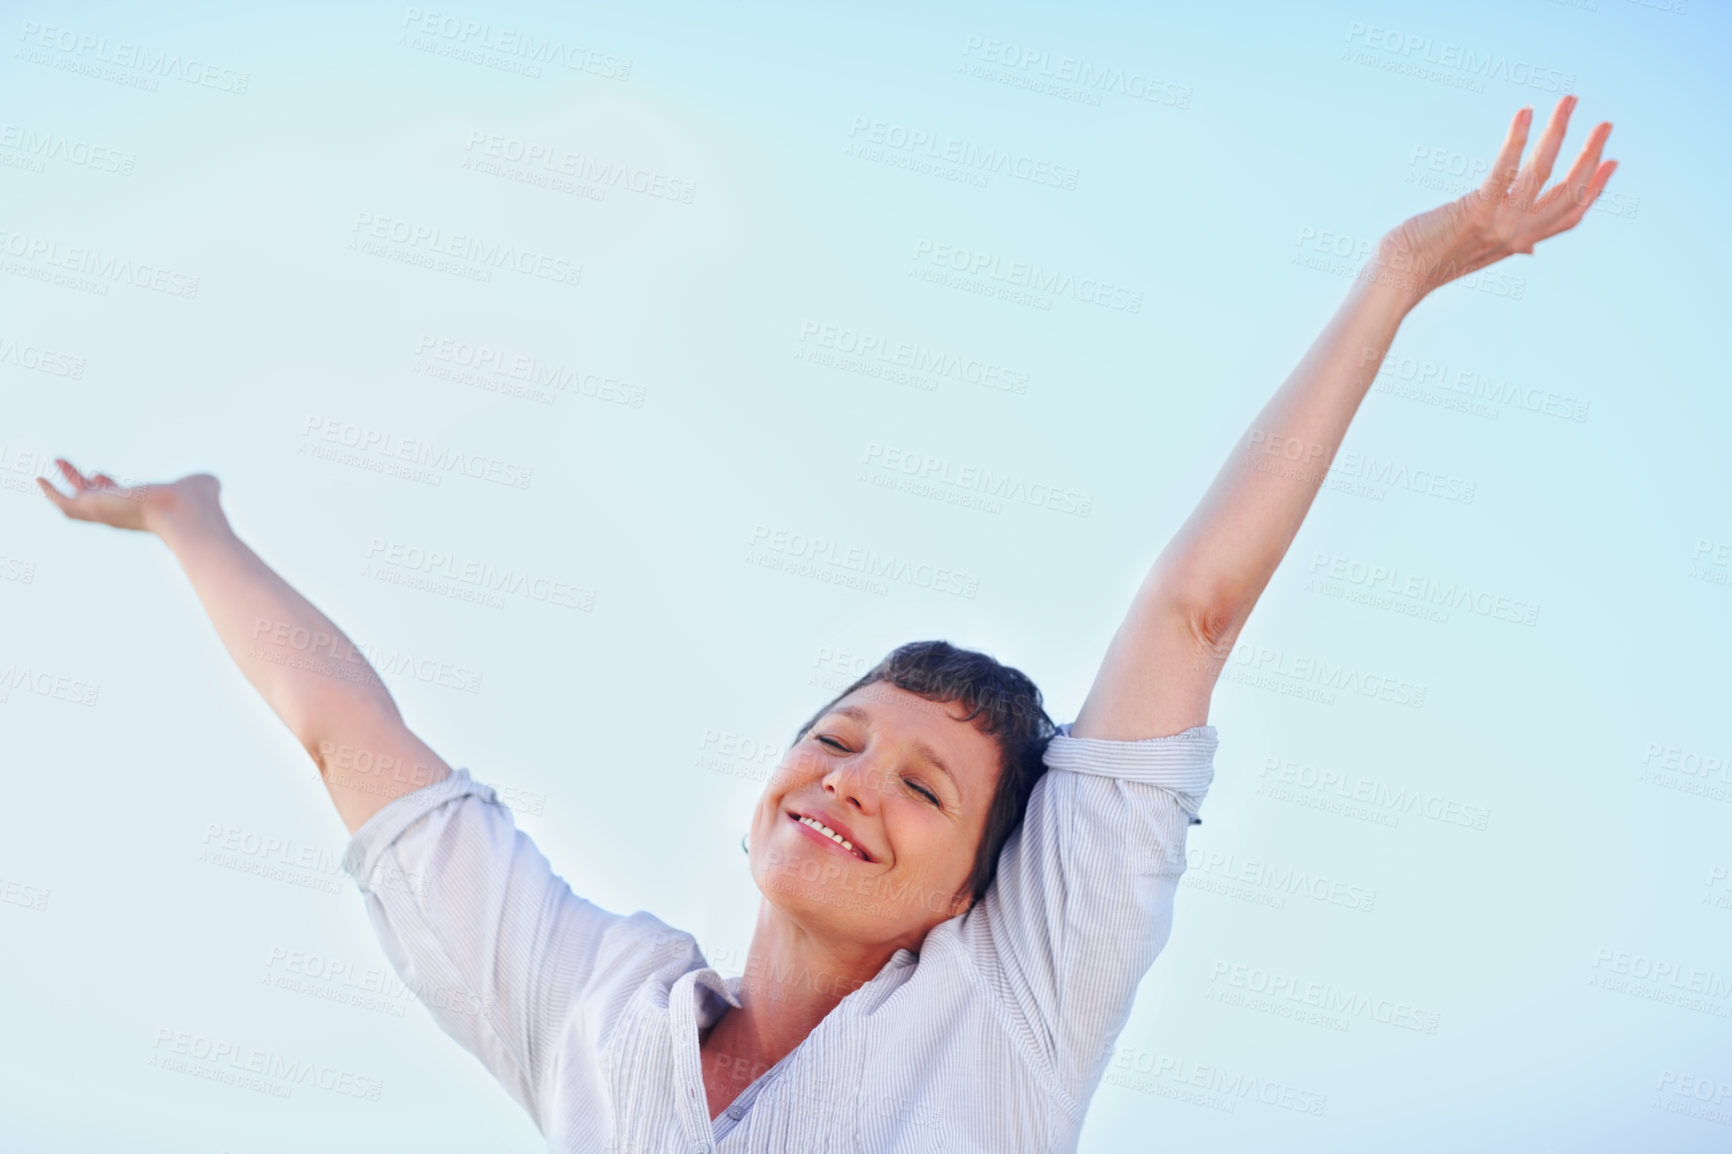 Buy stock photo Beautiful mature woman enjoying freedom outdoors with arms outstretched